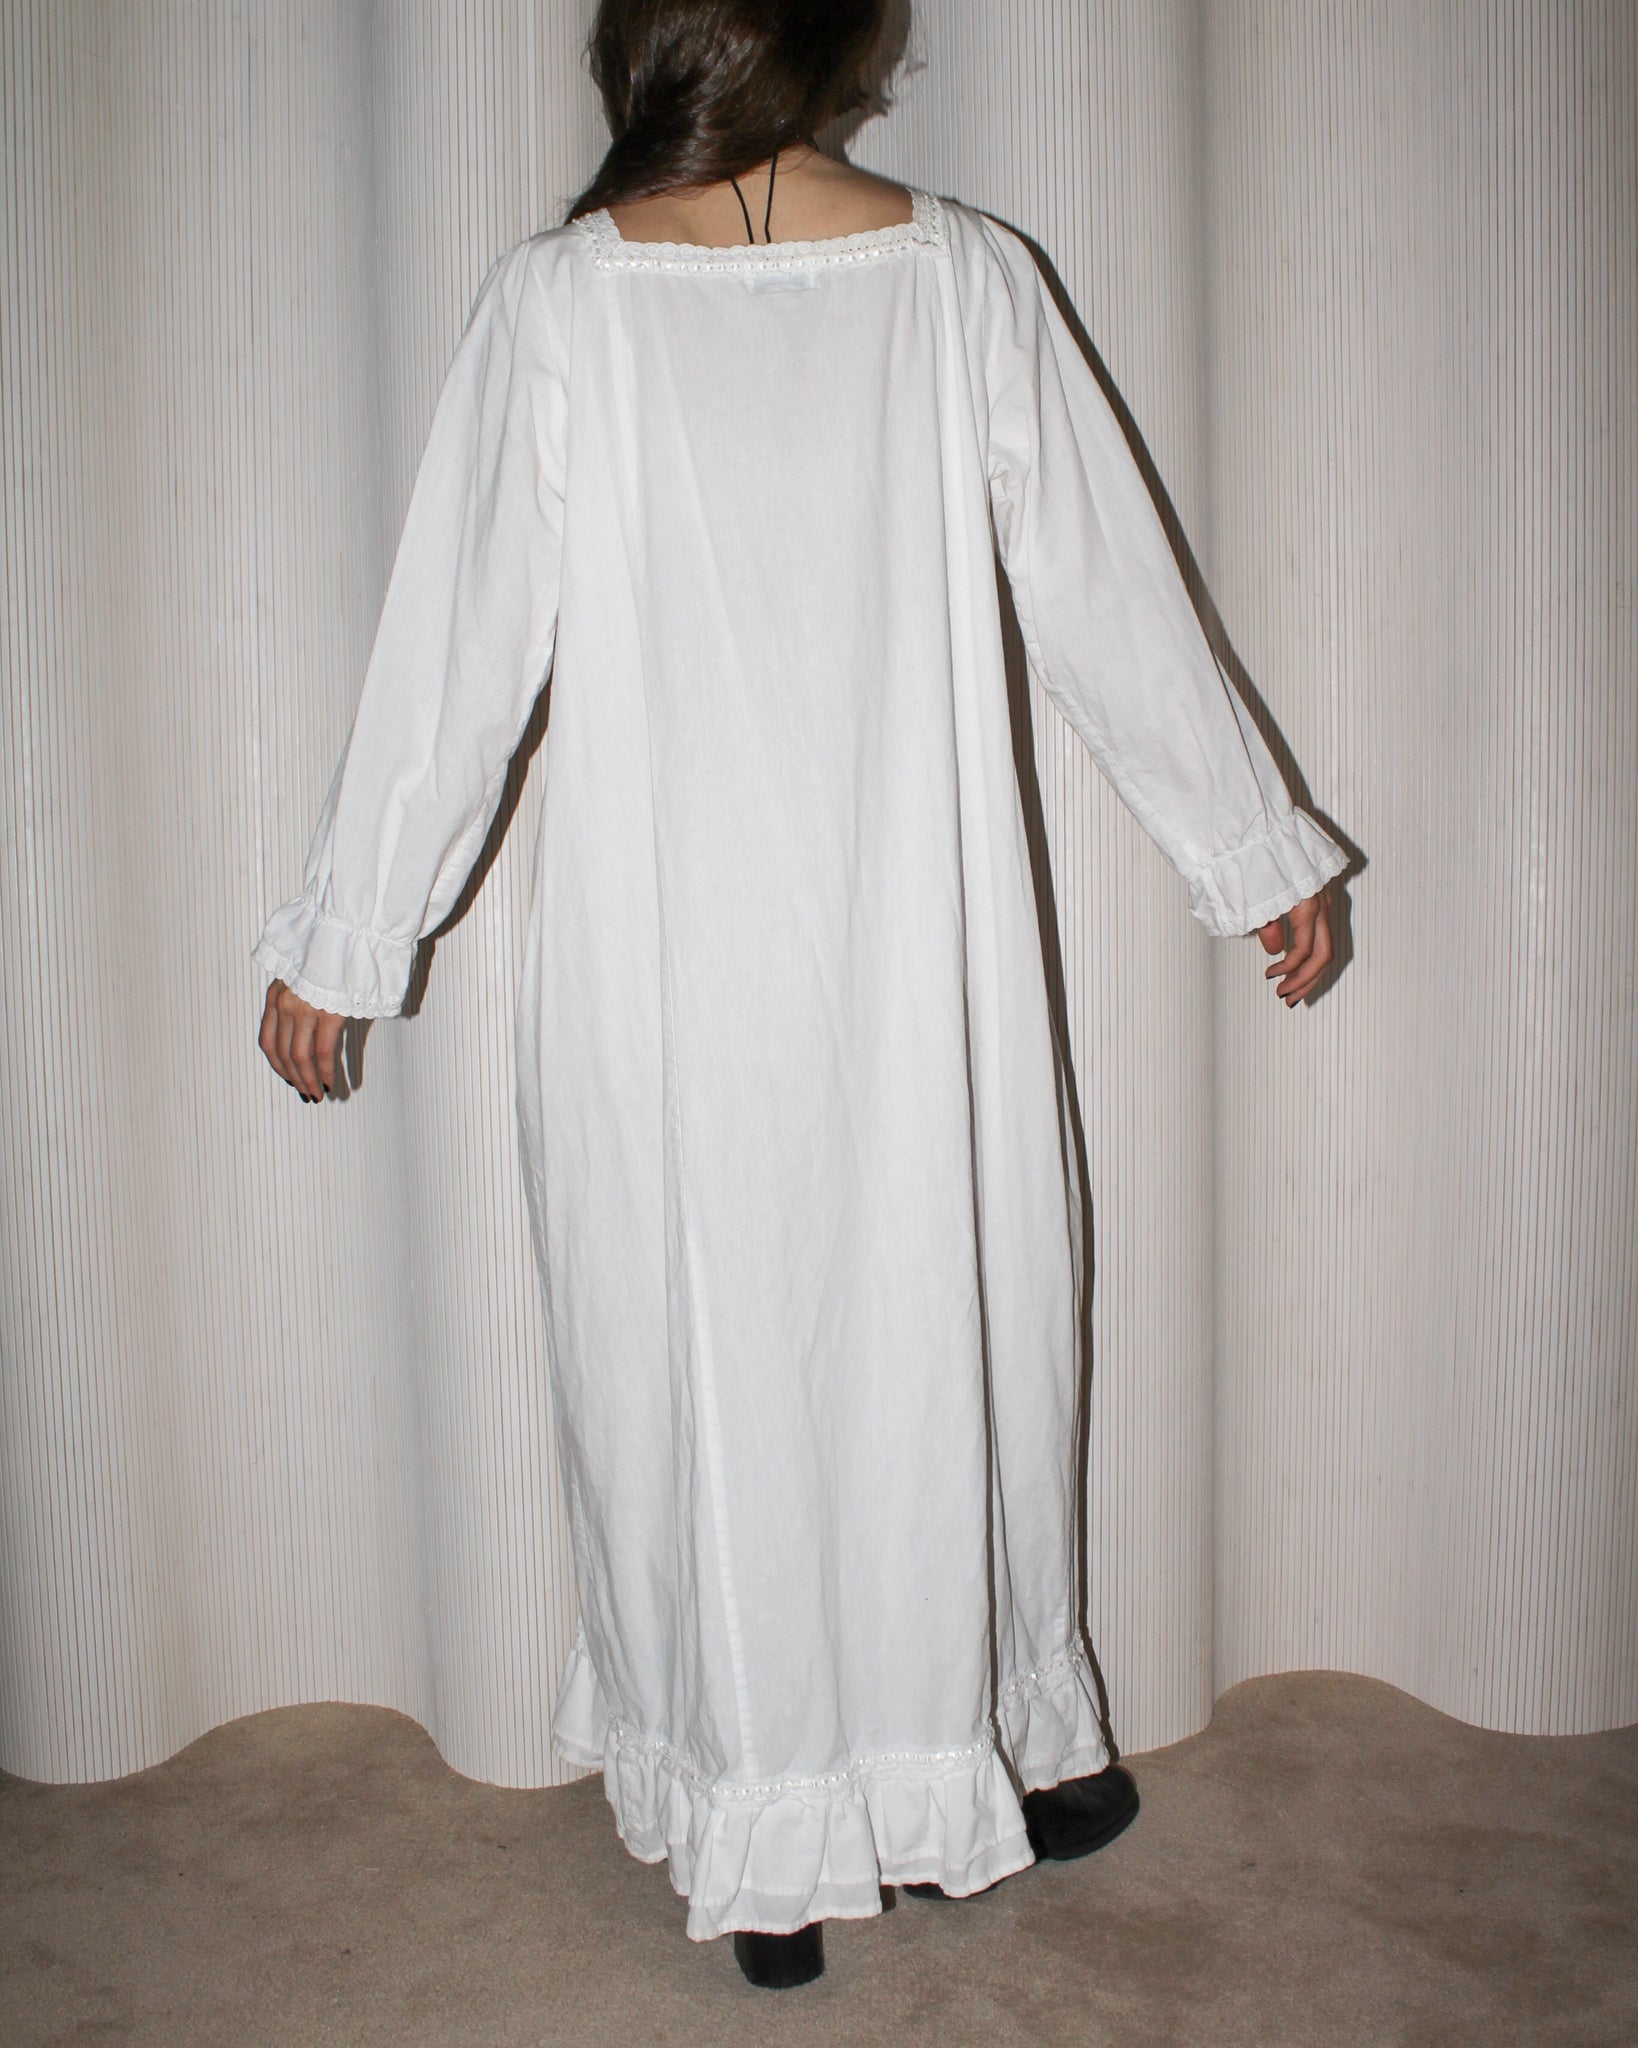 Long White Cotton Night Gown (Fits S-XL)